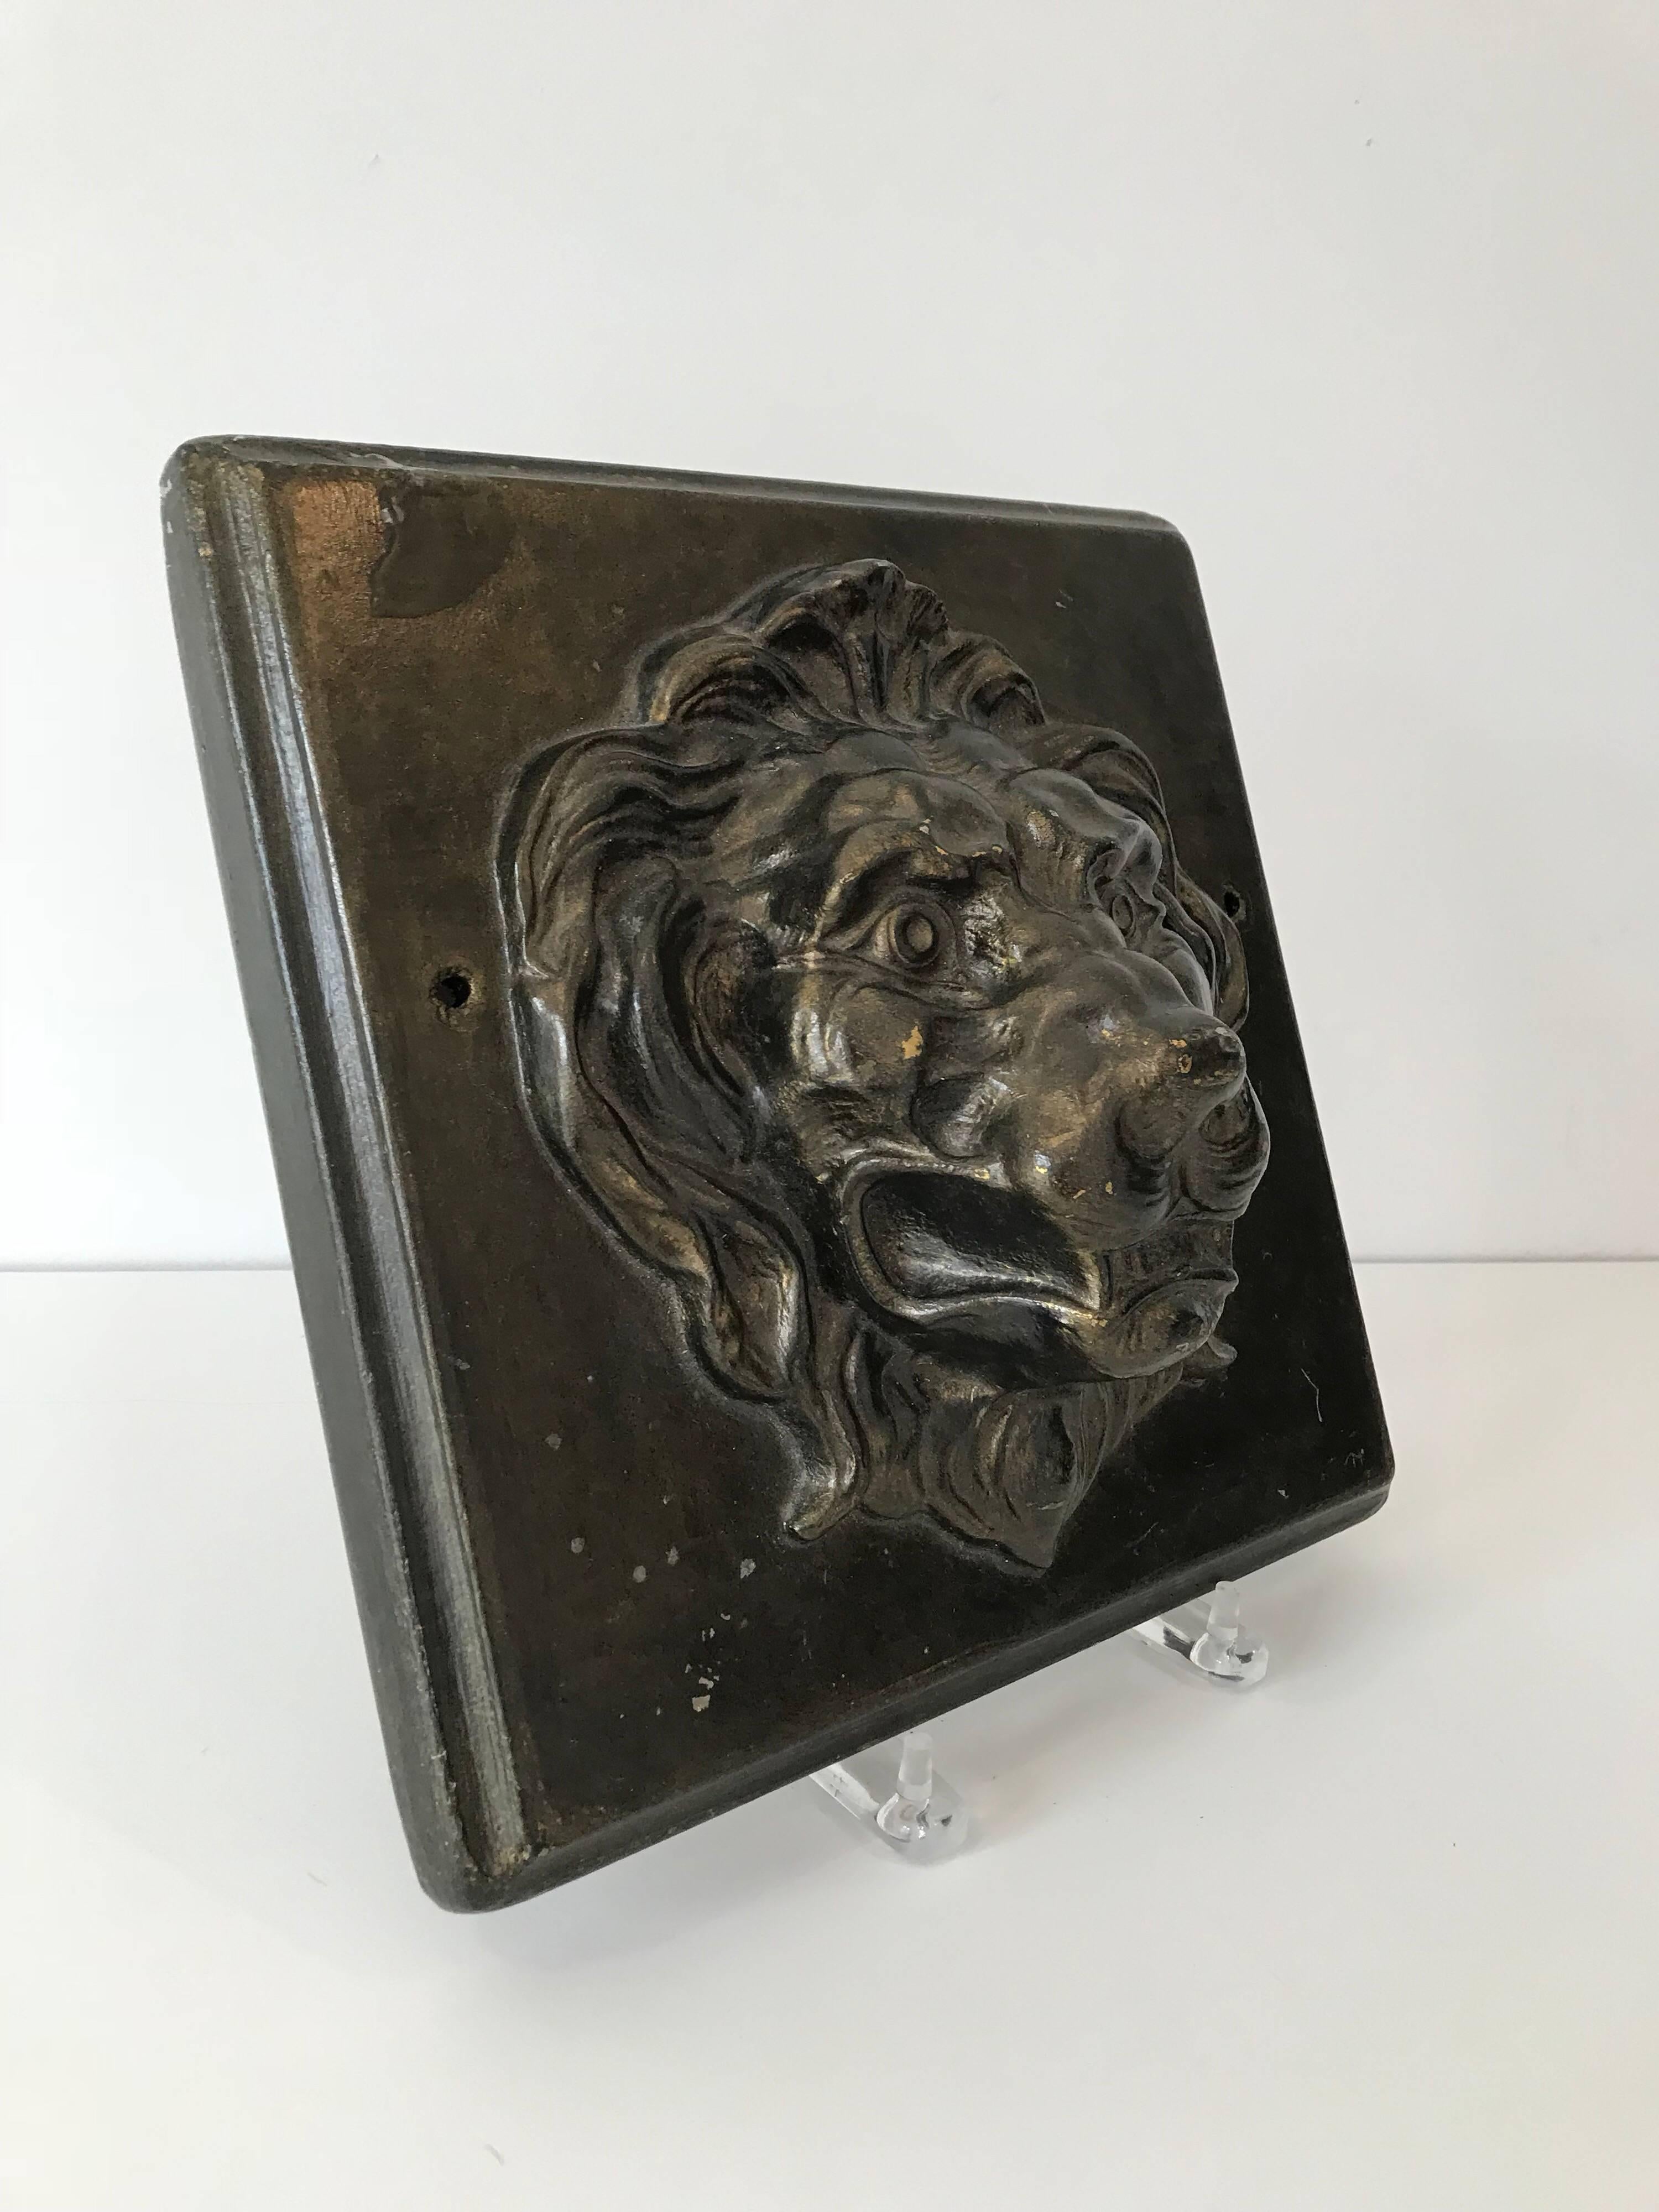 A vintage early 20th century plaster plaque of a lion with a bronze toned finish.